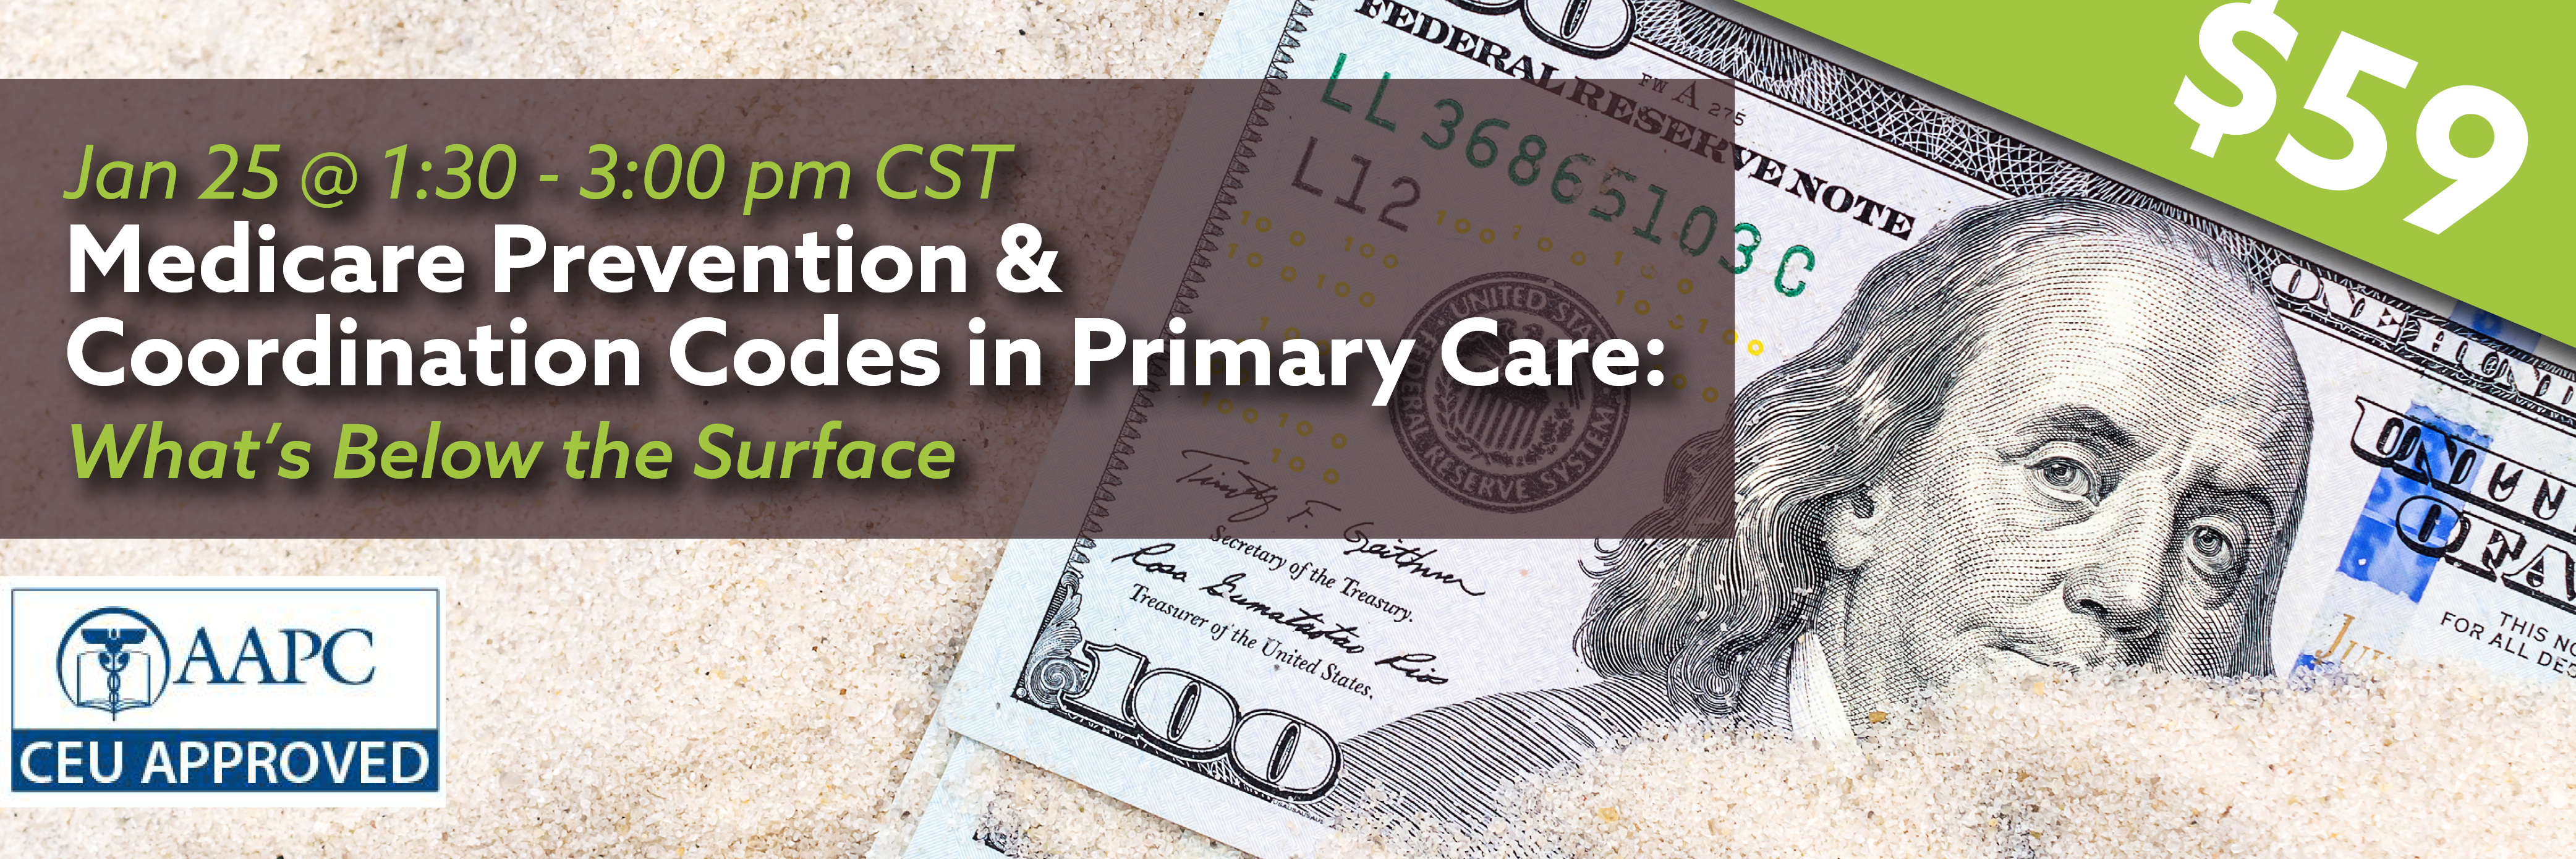 Jan 25 @ 1:30-3:00 pm CST Medicare Prevention & Coordination Codes in Primary Care: What's Below the Surface. $59